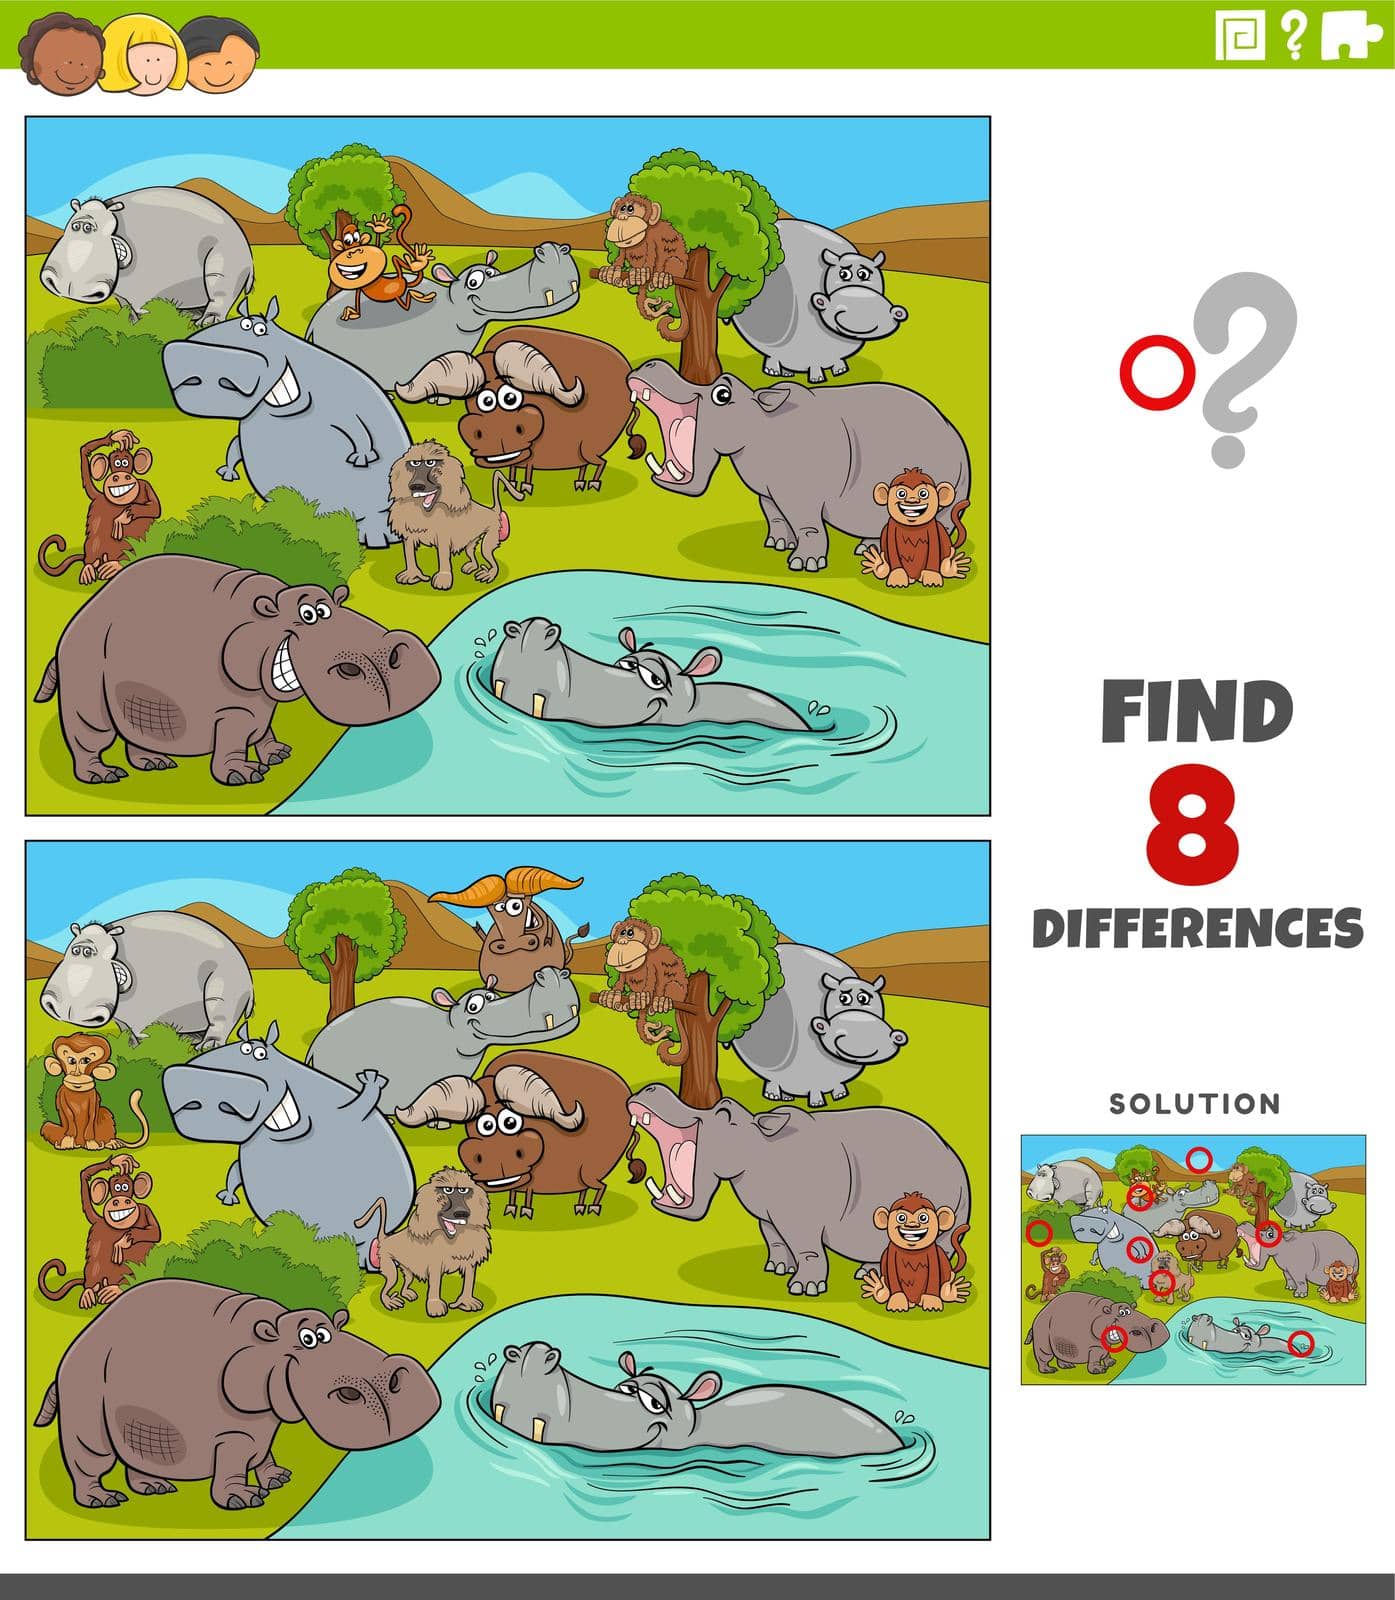 differences game with cartoon wild animal characters group by izakowski